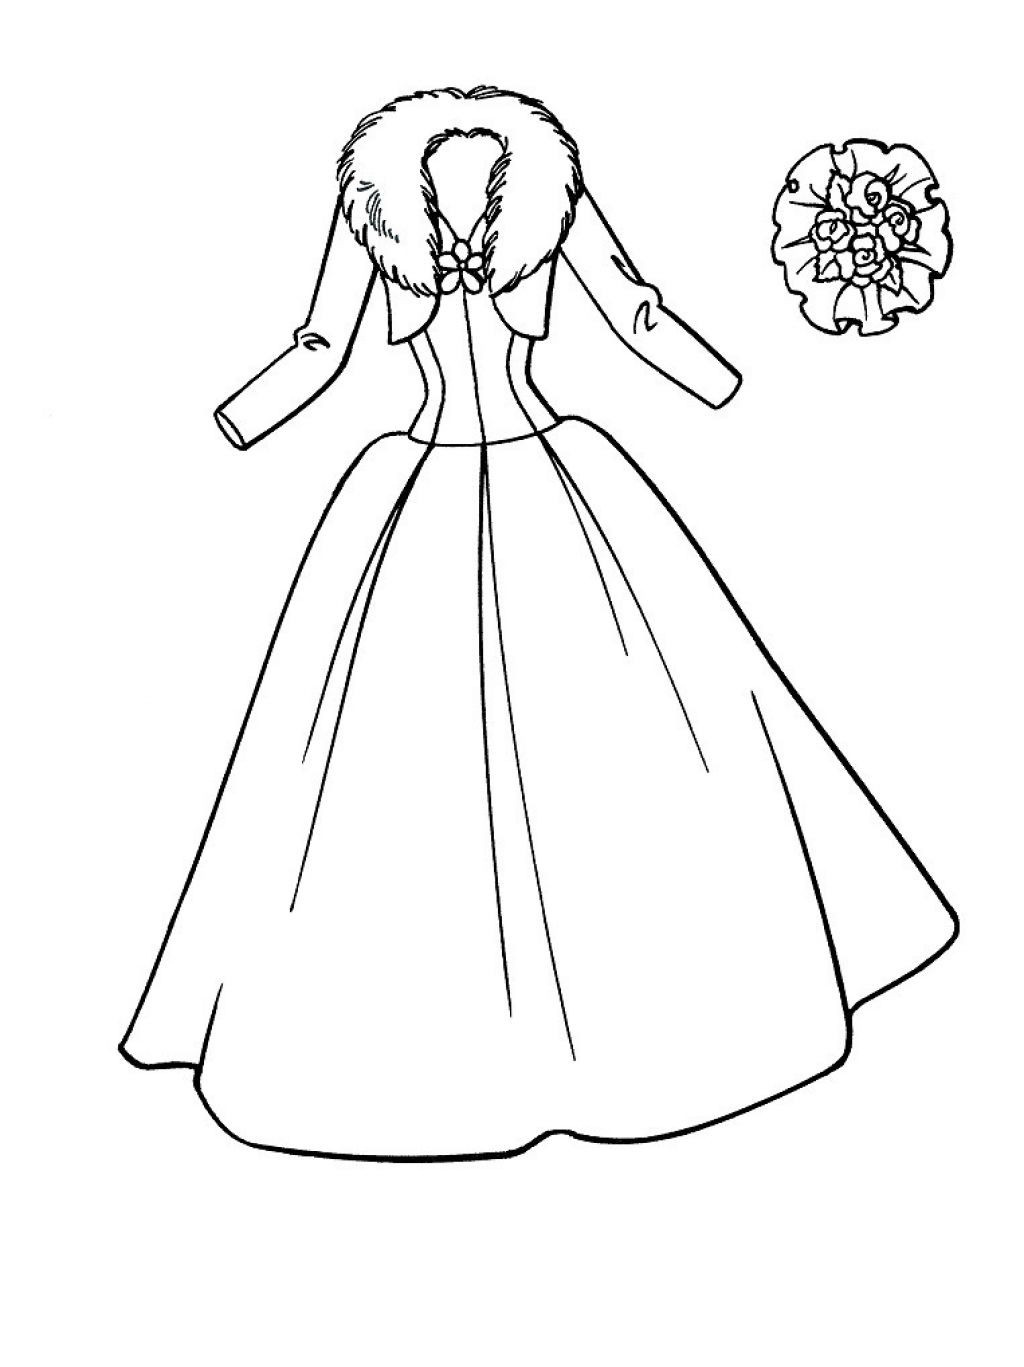 Coloring Pages Of Dresses
 Fancy La s In Dresses Coloring Pages